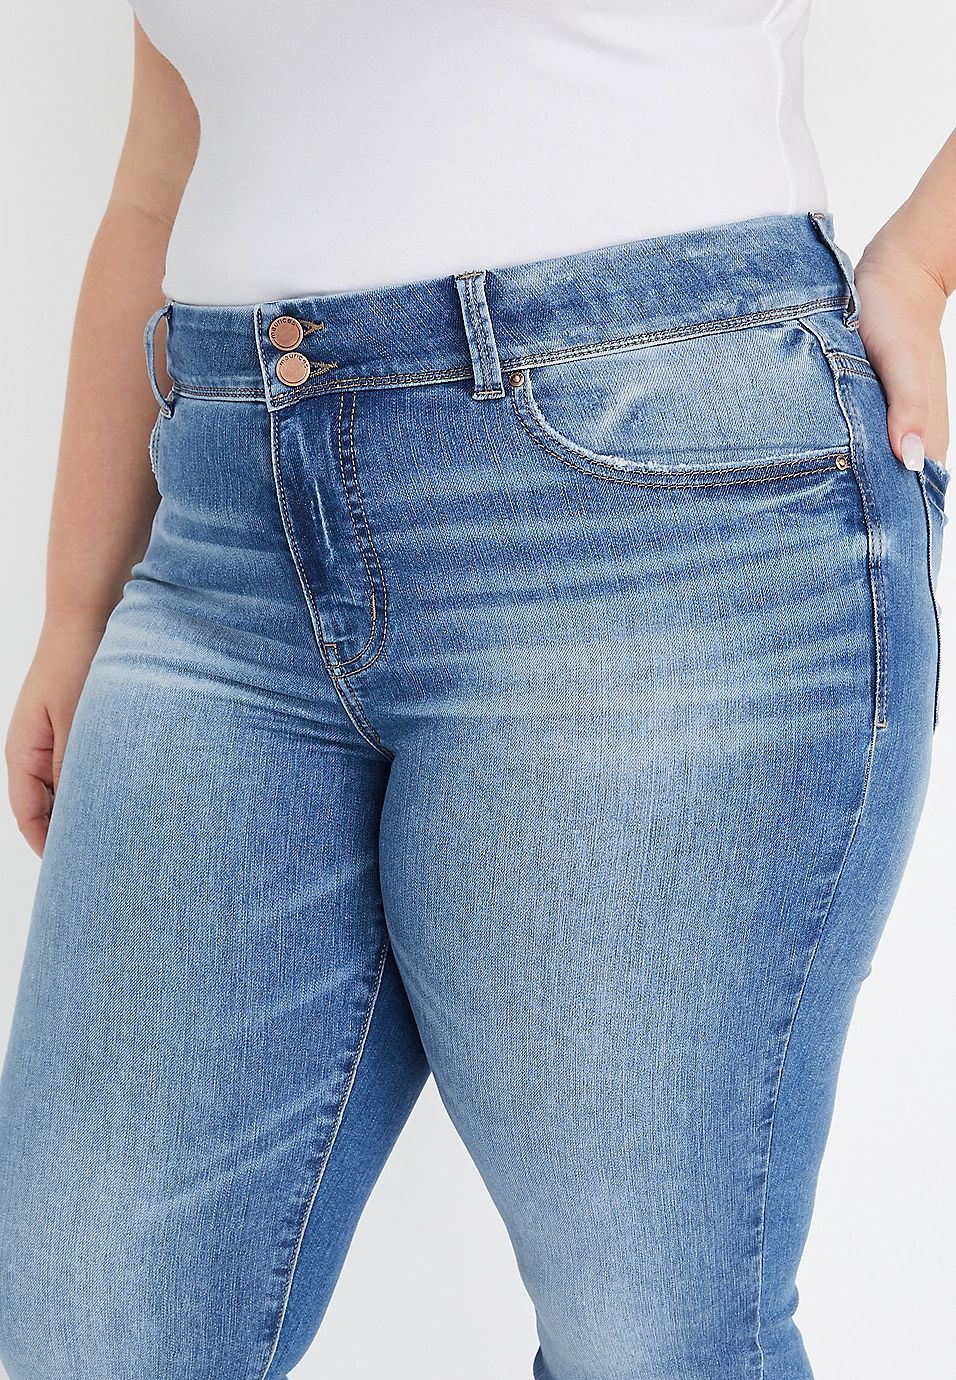 Plus Size m jeans by maurices™ Everflex™ Slim Boot High Rise Double Button Jean | Maurices